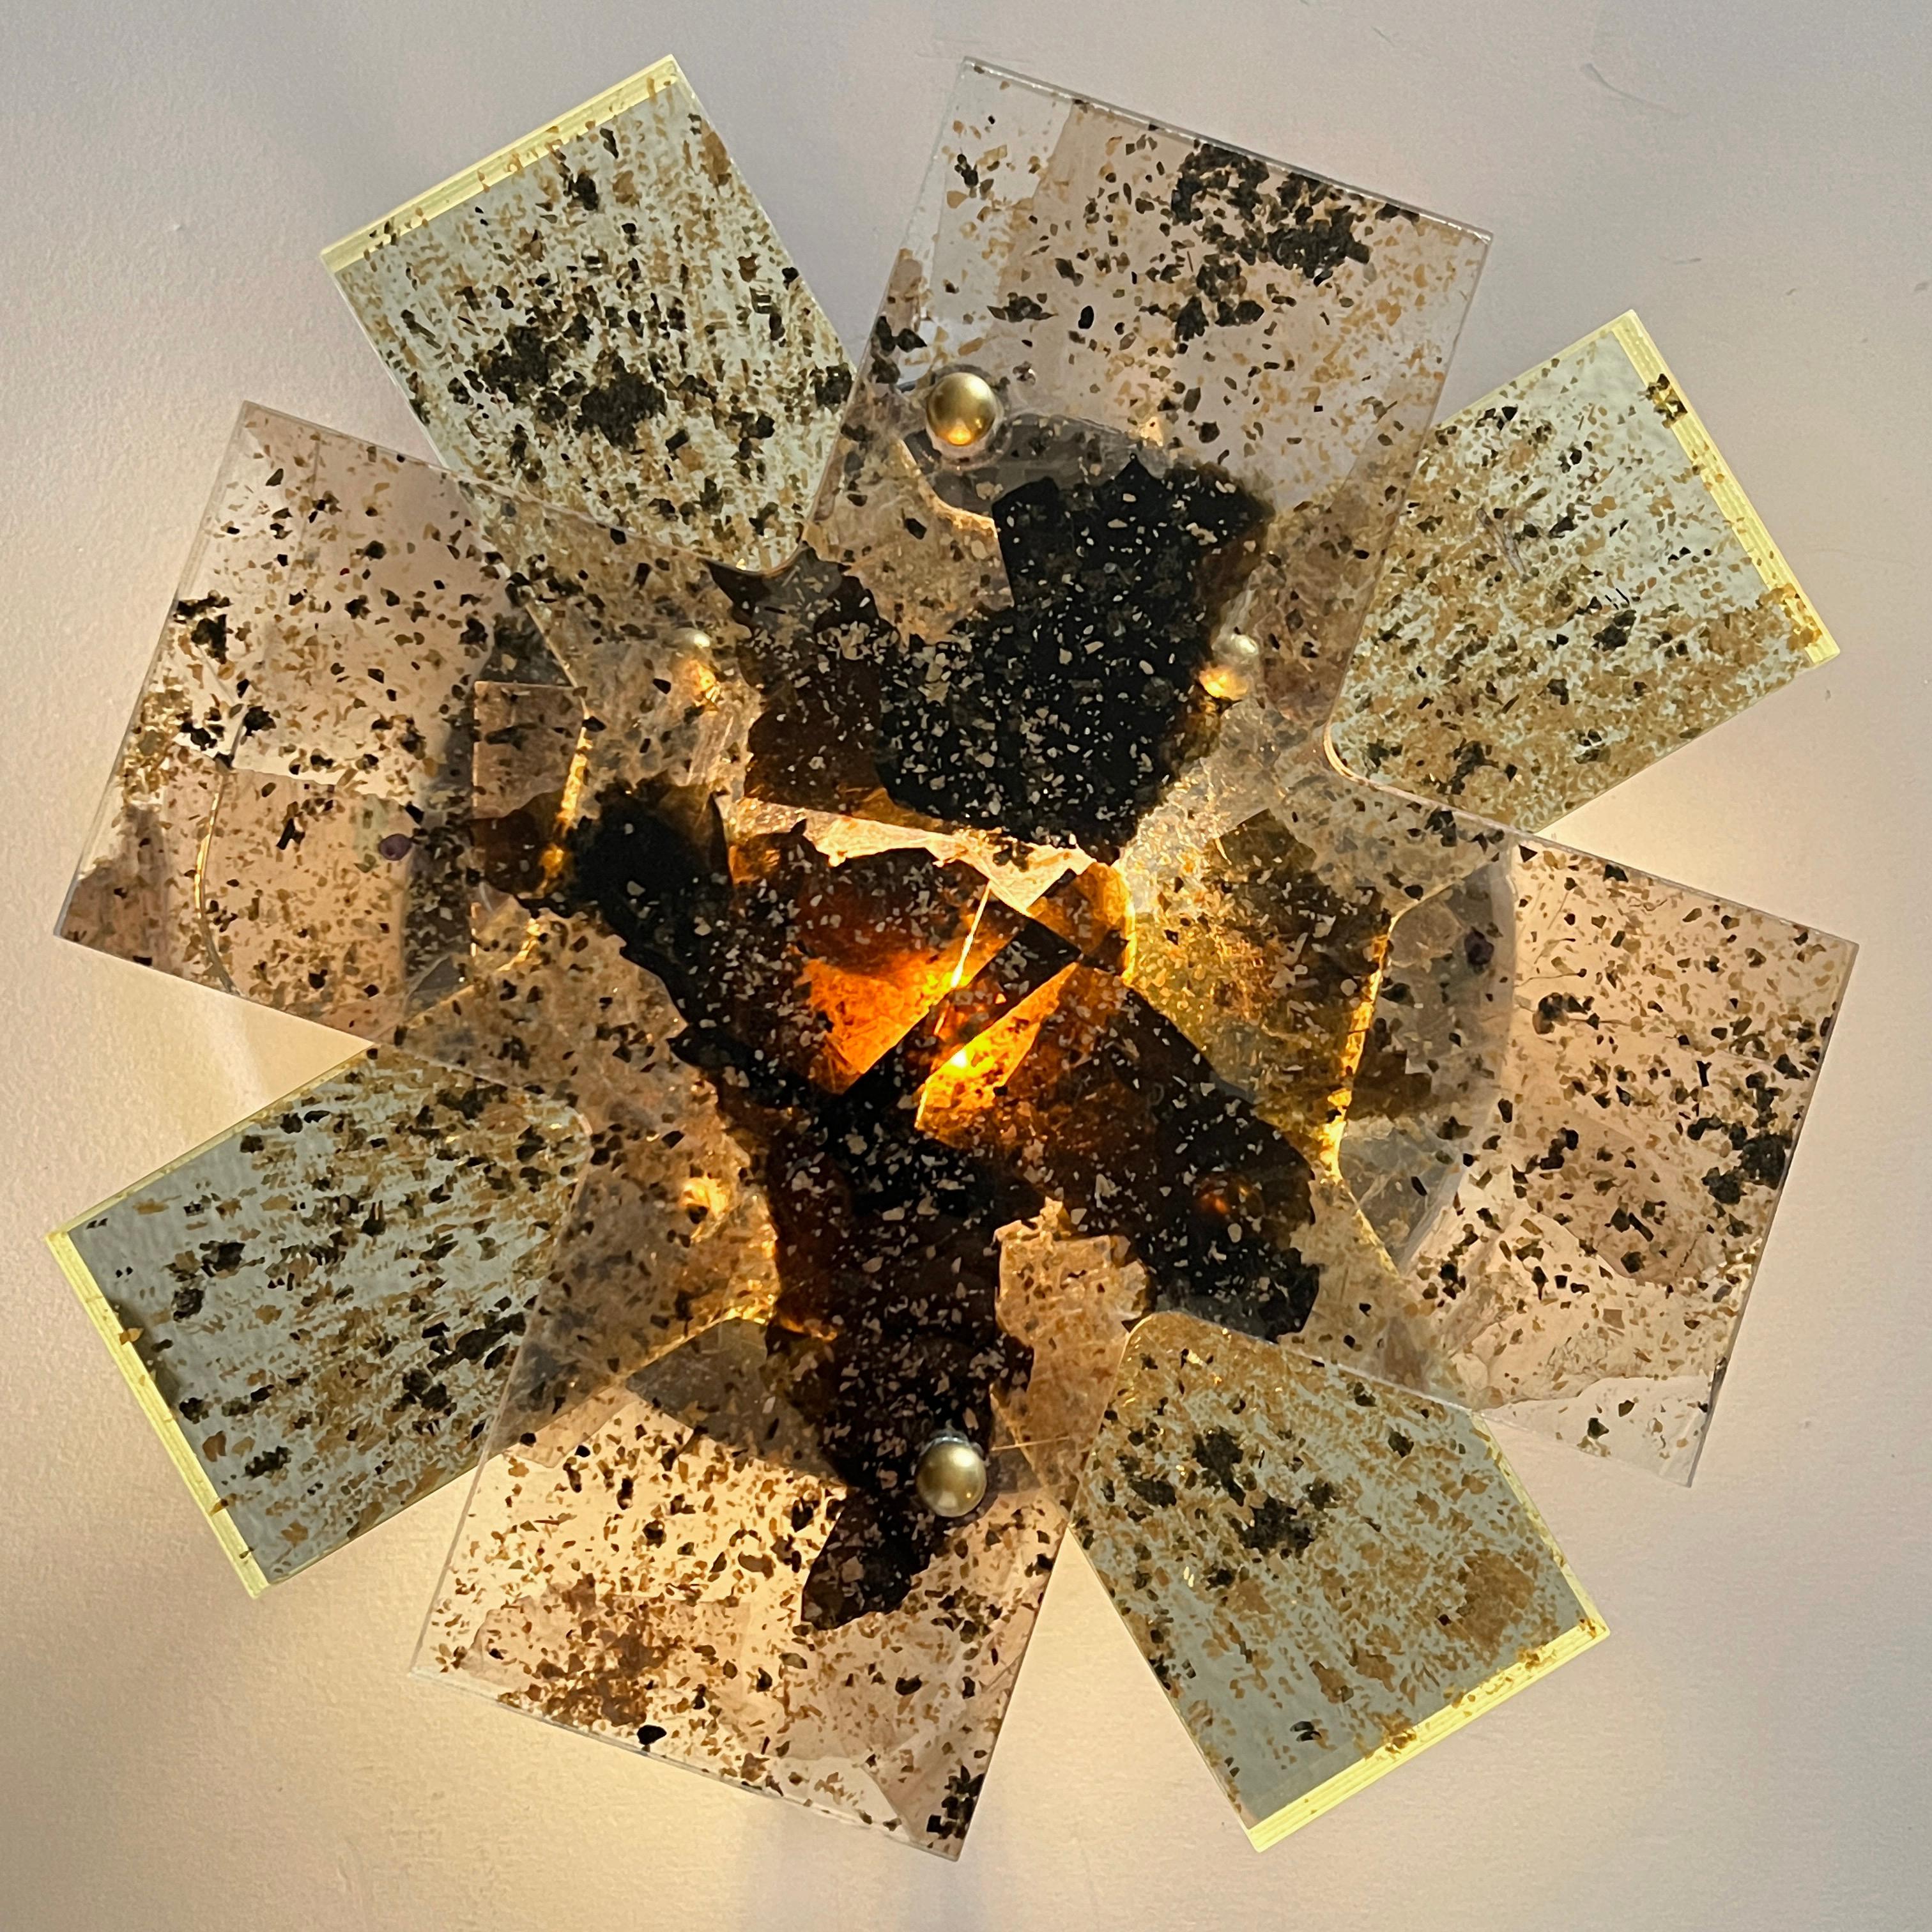 INTERMICA (NIMBUS LIGHT #2)
WALL SCONCE, 2023

InterMica® laminated Starphire and mirror with amber, gold & black mica flakes, LED bulb 14 x 14 x 2.75 in.

InterMica is an architectural specialty glass product, crafted from carefully selected flakes